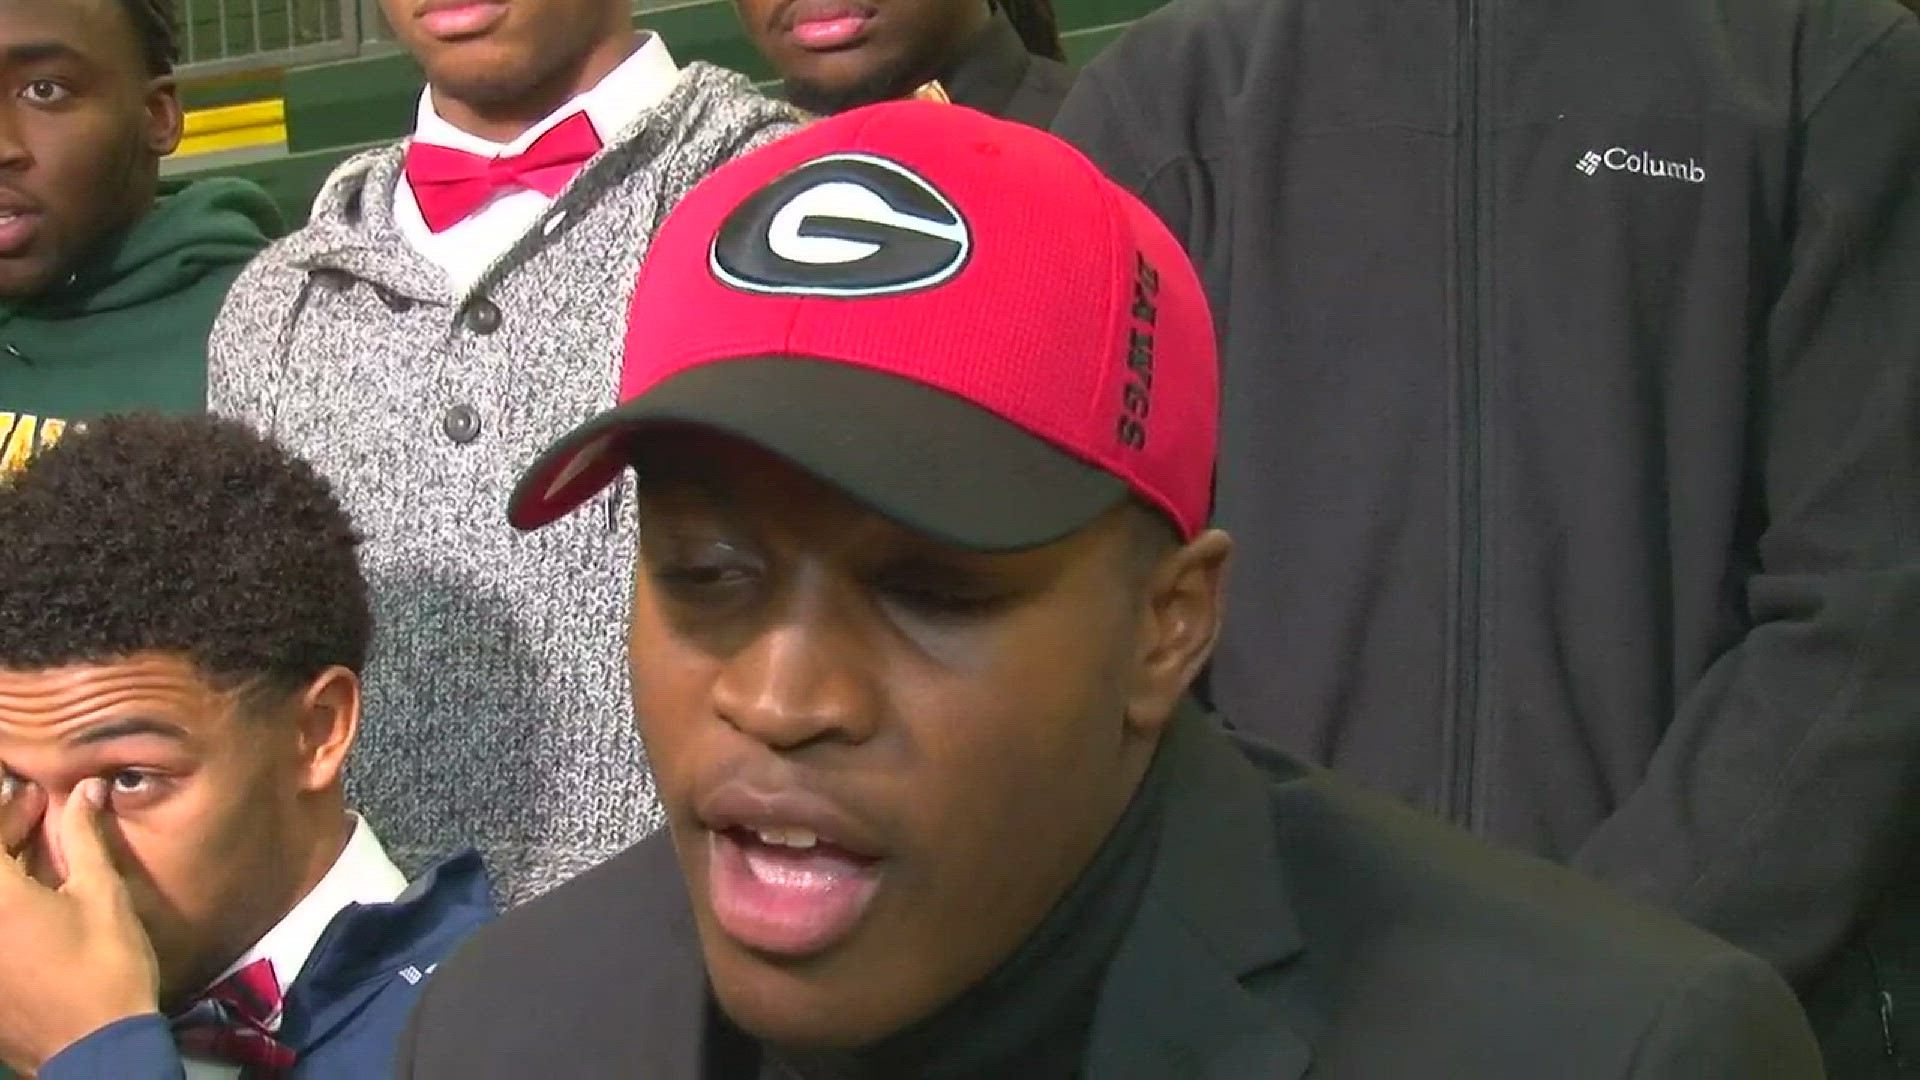 Spring Valley standout linebacker Channing Tindall officially signs with the University Of Georgia on national signing day. He talks about being apart of the number one recruiting class in the country.